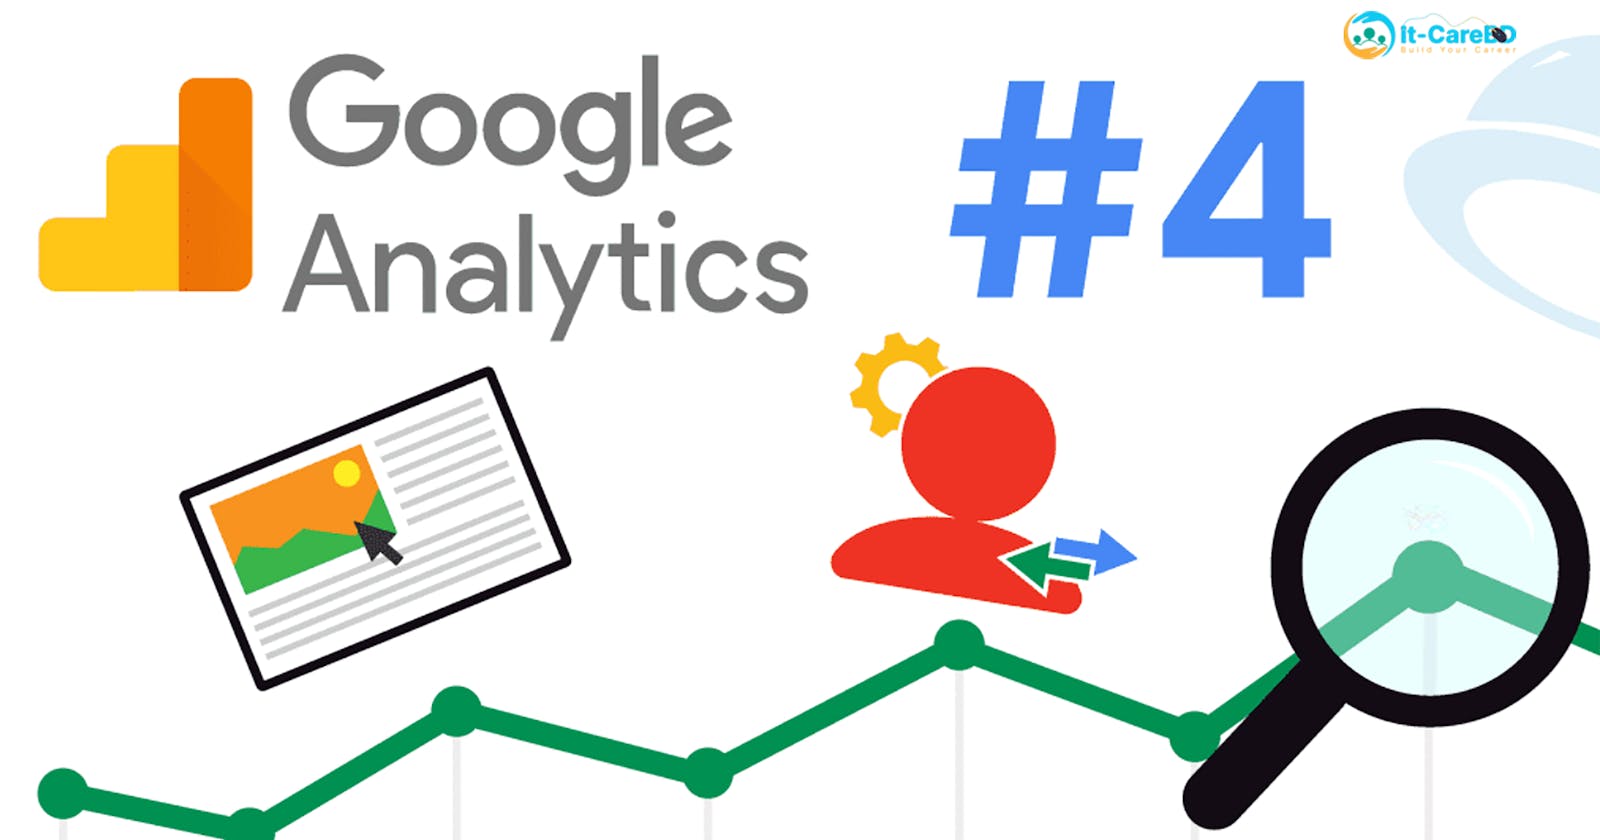 Why is Google Analytics 4 (GA4) important for businesses?